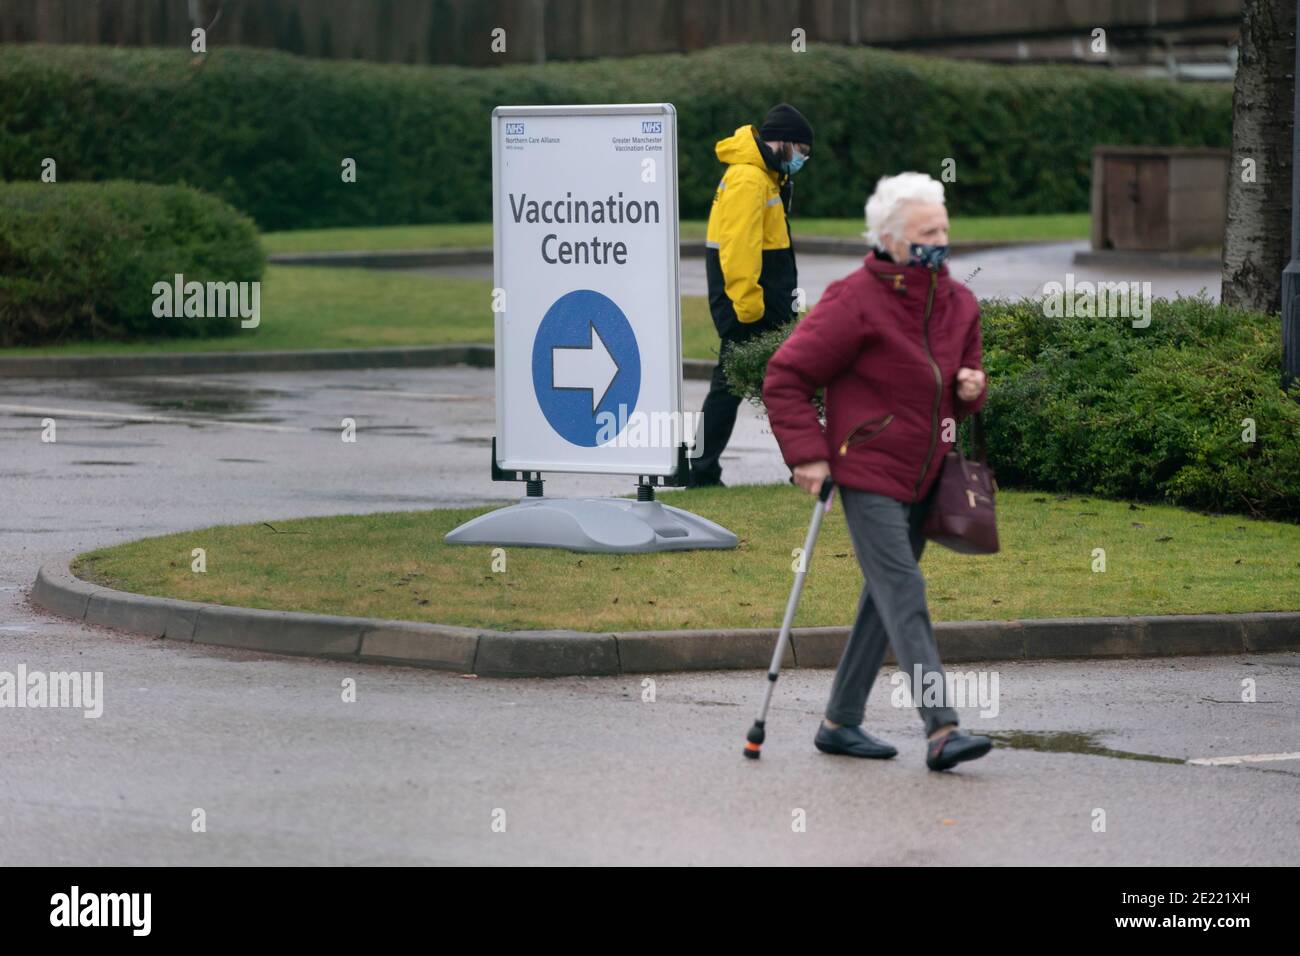 Manchester, UK, 11th Jan 2021. Members of the public arrive at a vaccination centre in Manchester as nationwide mass testing begins at 5 centres throughout the country in the face of the Coronavirus, Manchester, UK. Stock Photo